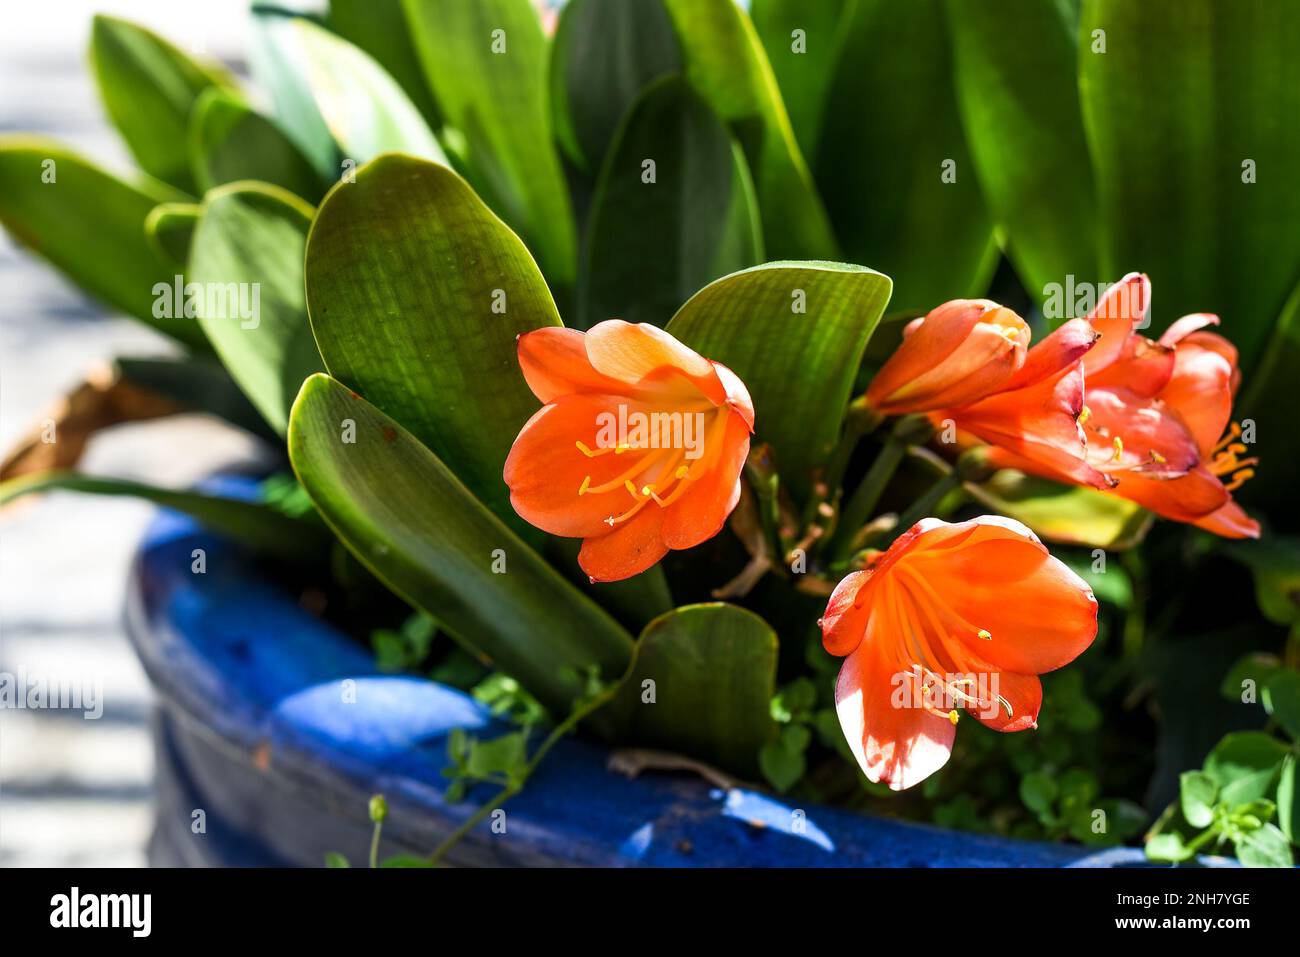 Clivia miniata the Natal lily or bush lily flower growing in flower pot in Vietnam Stock Photo